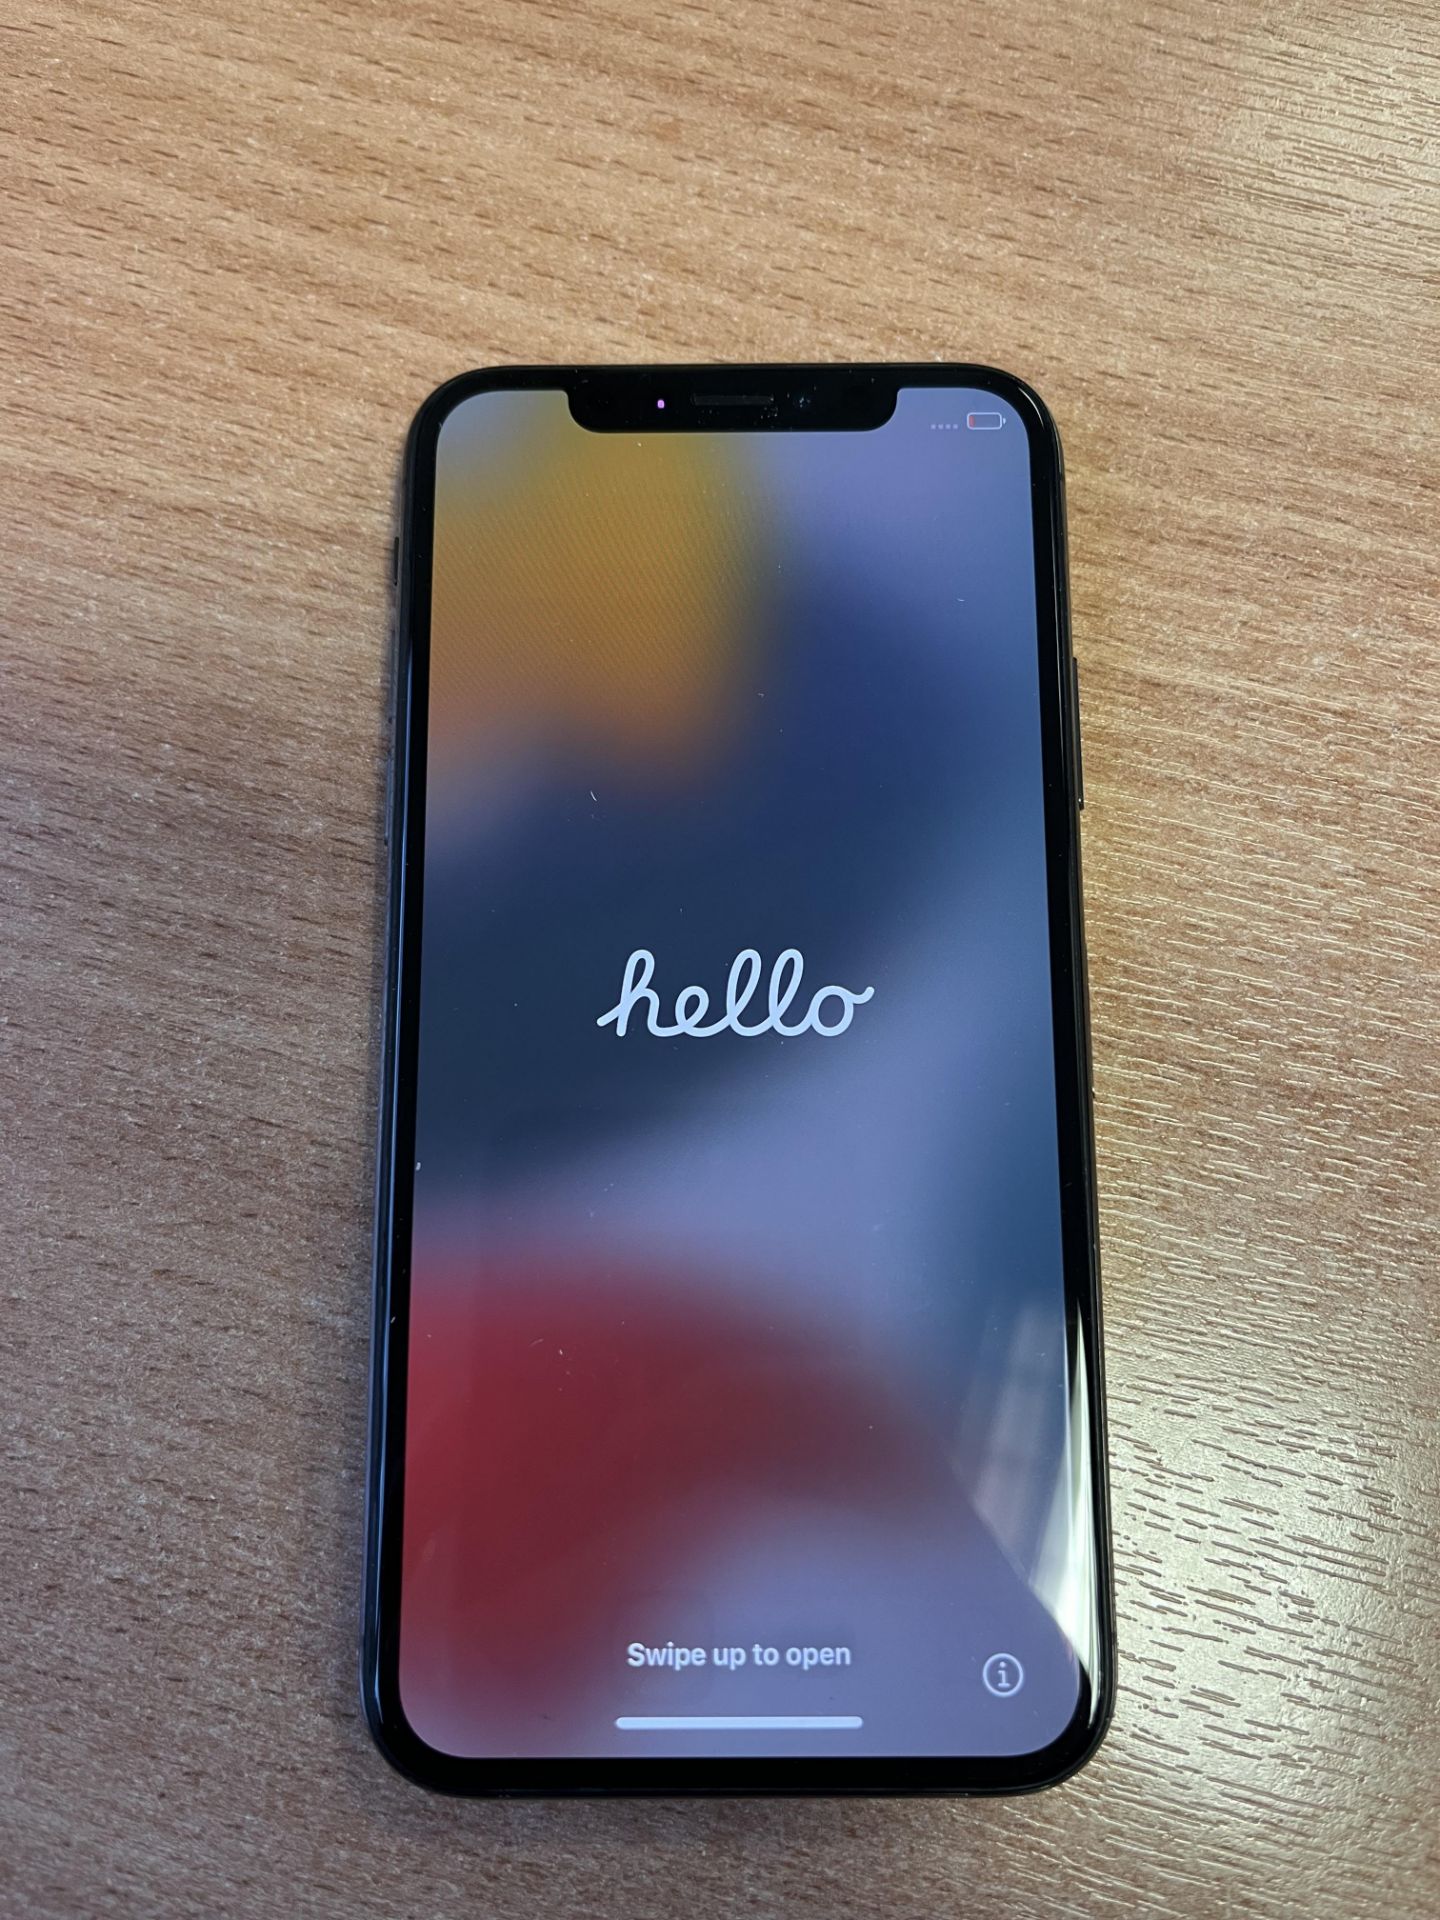 2x iPhone X's. No chargers, unknown condition. - Image 4 of 4